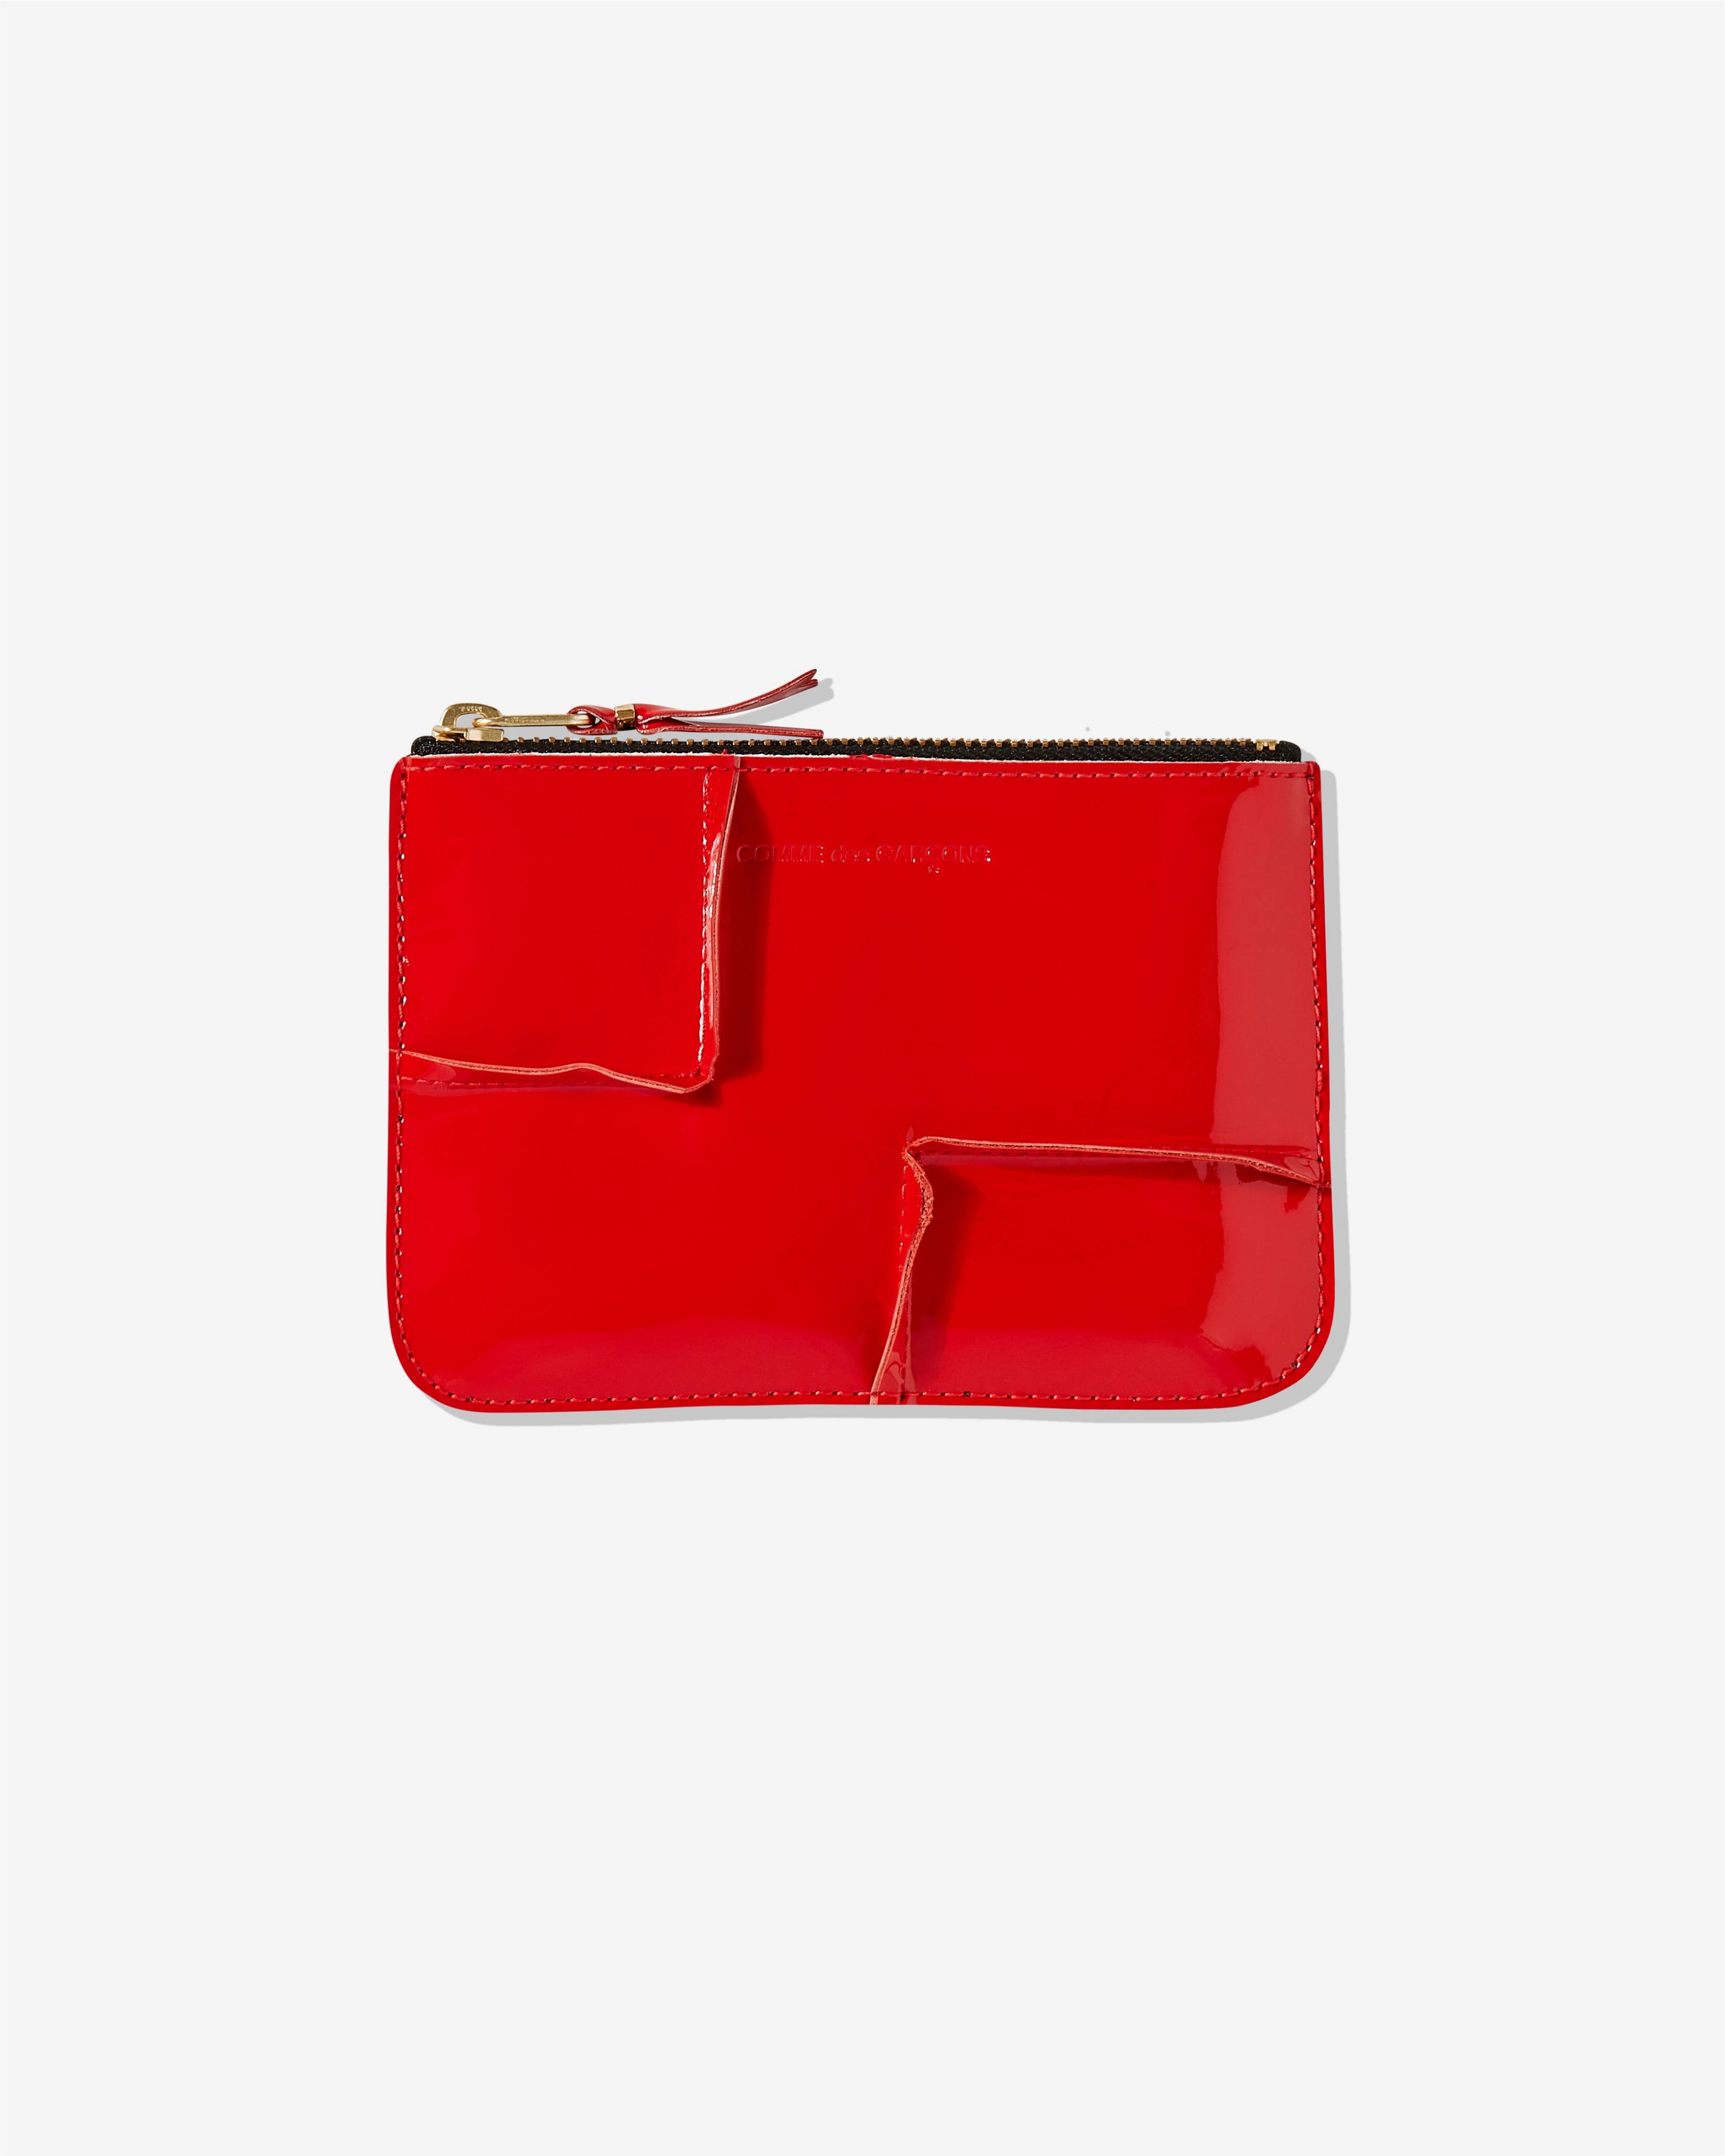 CDG Wallet - Reversed Hem Zip Pouch - (Red) SA8100RH by COMME DES GARCONS